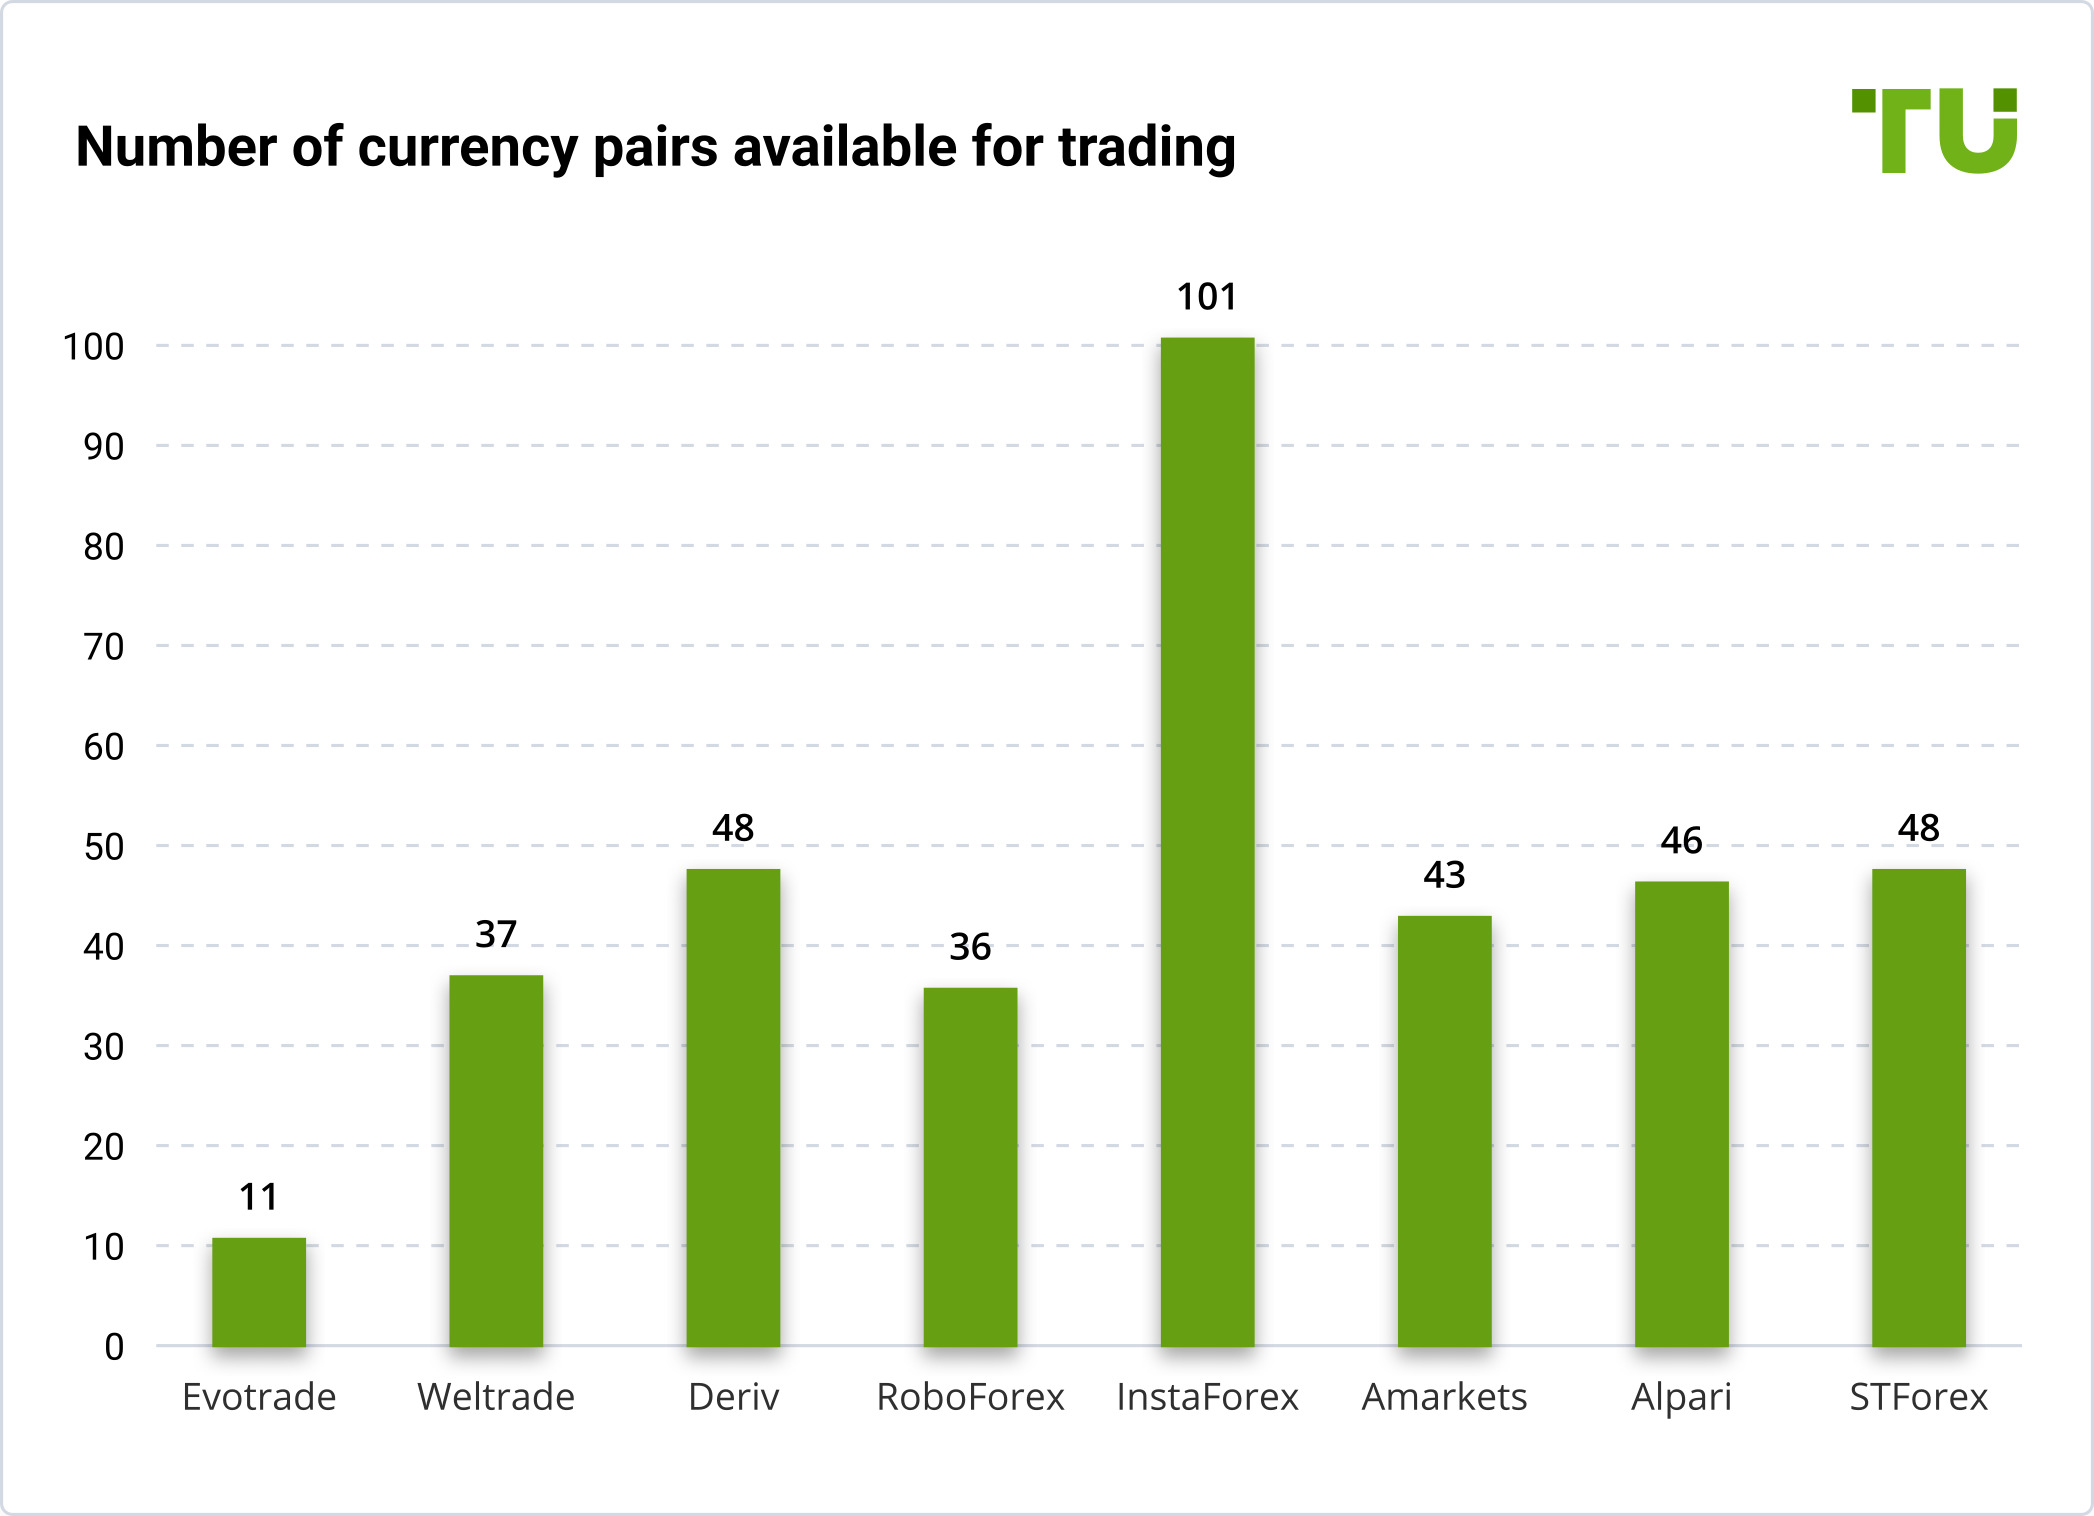 The number of currency pairs available for trading with different brokers